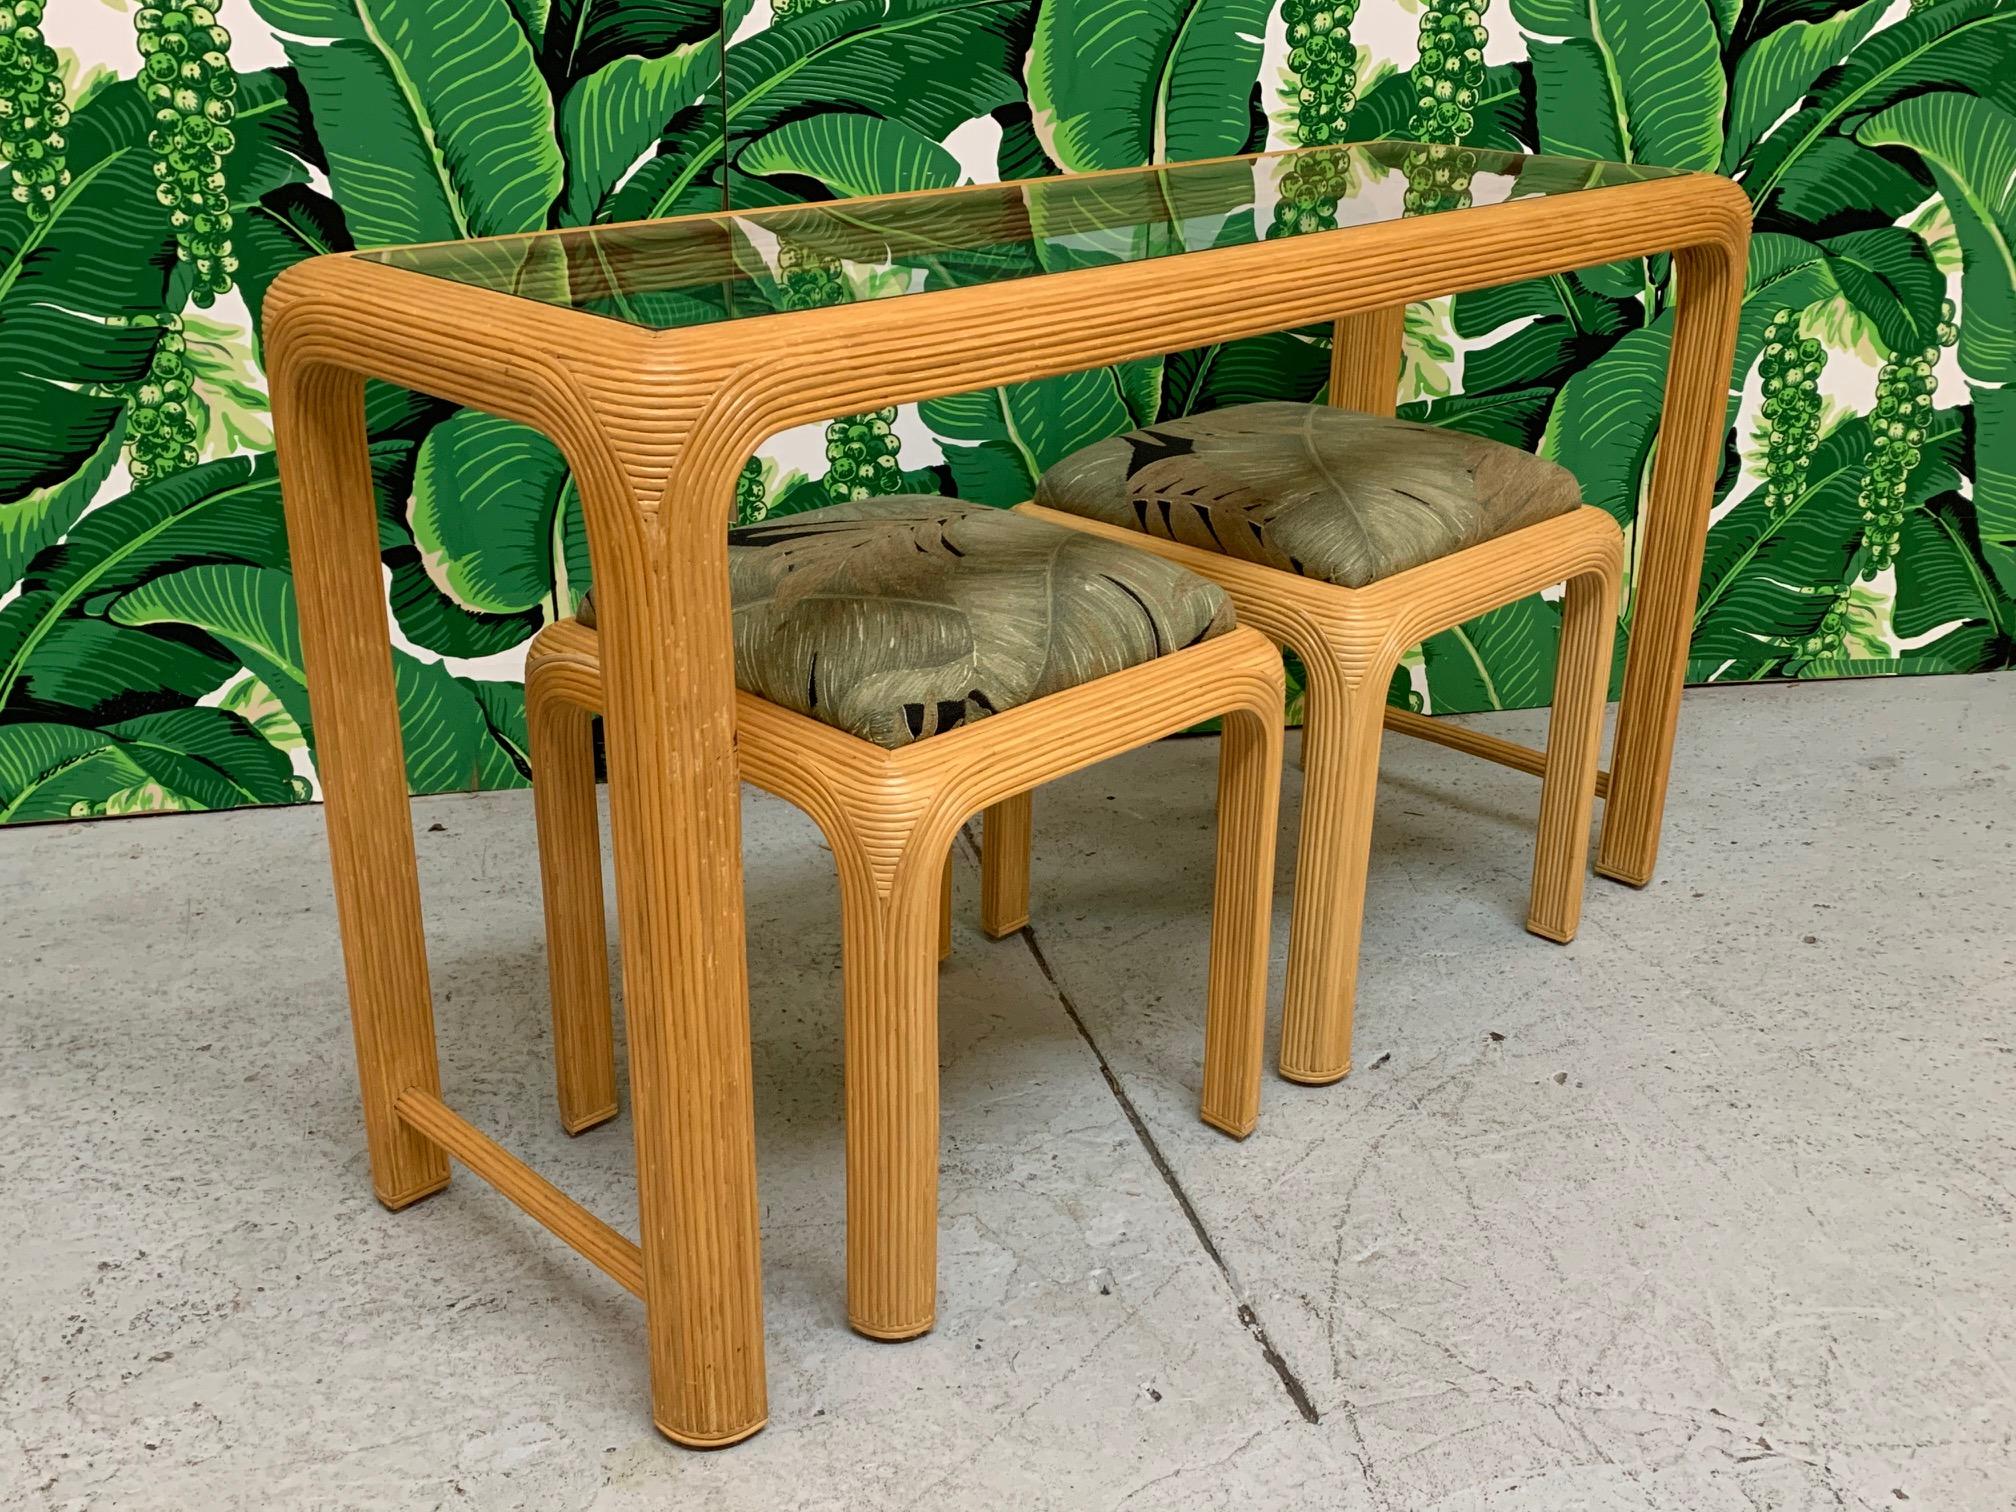 Console table and matching footstools feature pencil reed rattan veneer and a tropical palm leaf print upholstery. Recessed glass top. Very good condition with only minor imperfections consistent with age.
Table measures: 52.25